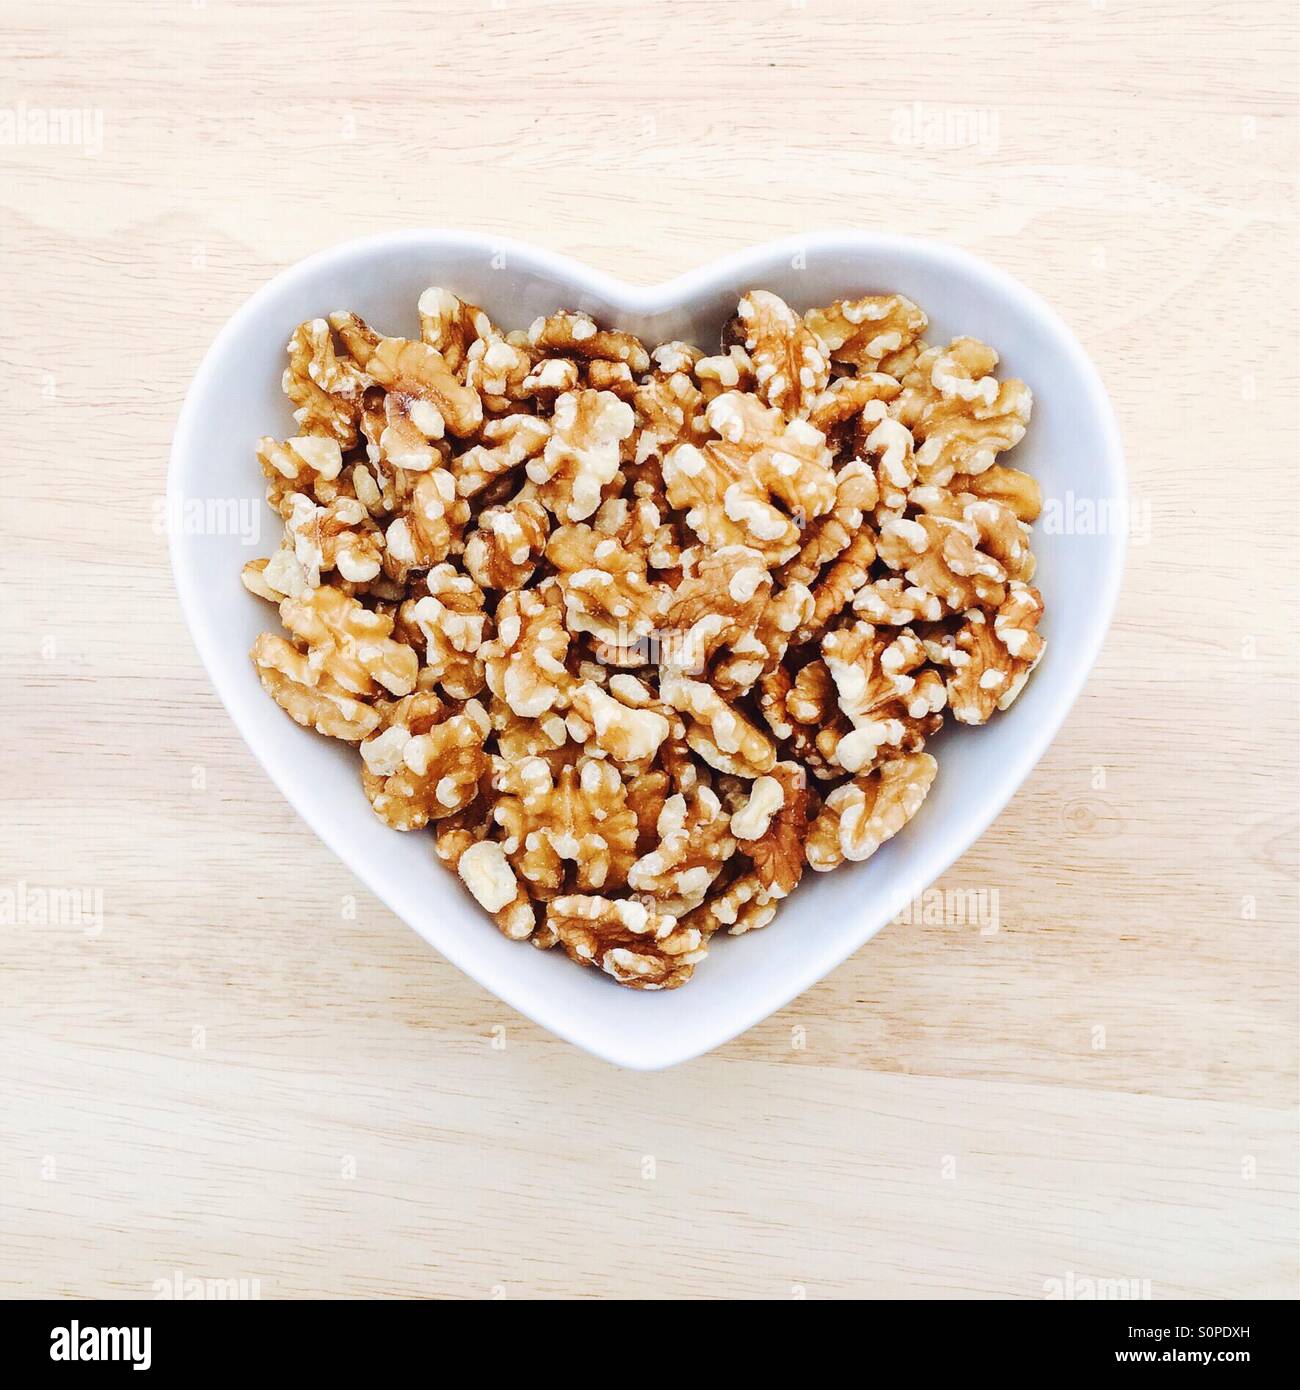 Walnuts in white heart shaped bowl Stock Photo